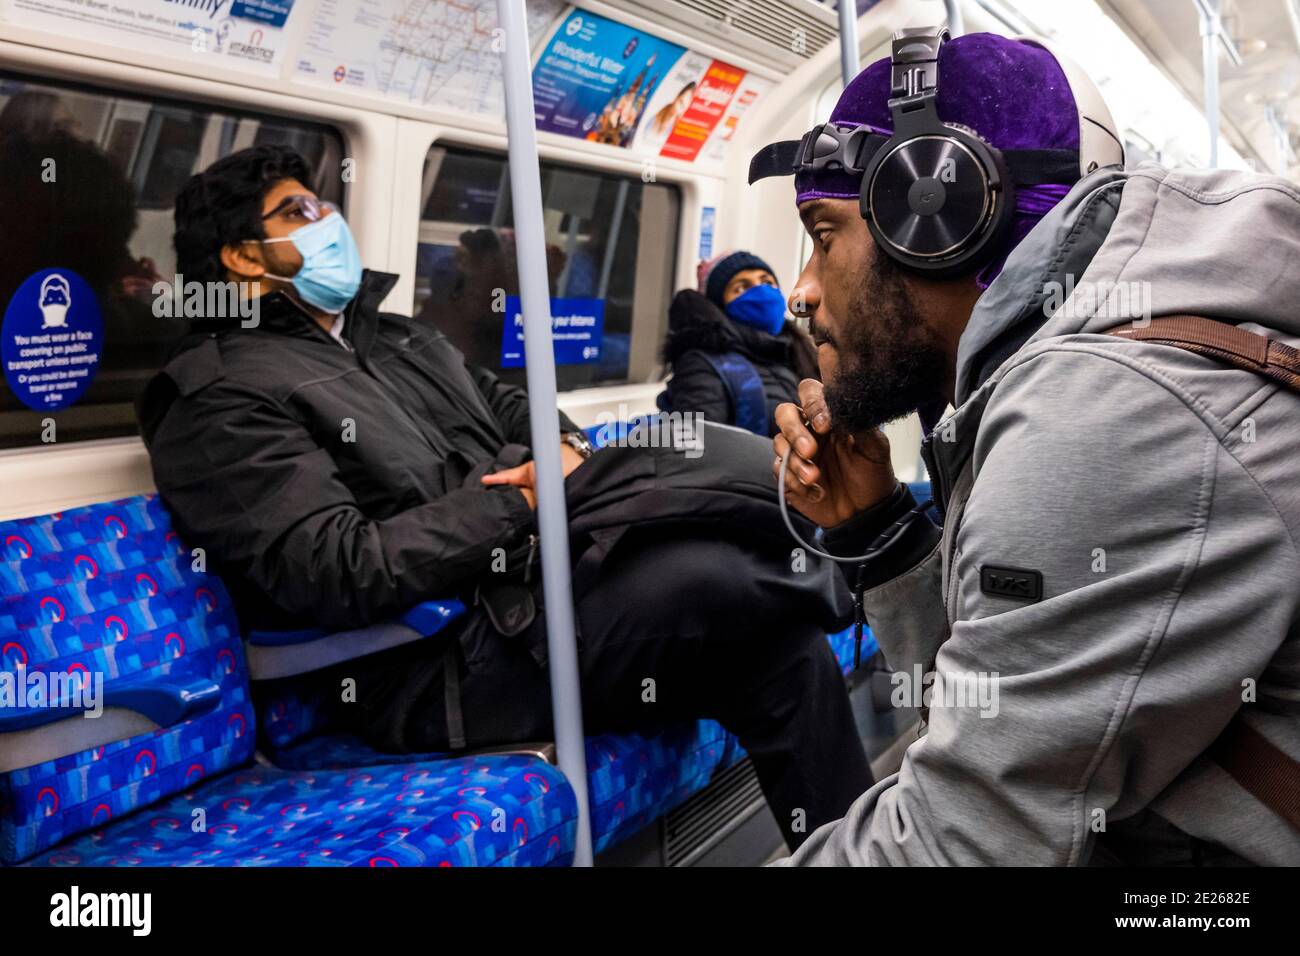 London, UK. 12th Jan, 2021. A woman in a mask tries to get the attention of an unmasked man, who ignores her as he appears to be talking to someone on his phone - The underground is still fairly busy despite the new national Lockdown, Stay at Home, instructions. Most travellers wear masks as they are already mandatory. Credit: Guy Bell/Alamy Live News Stock Photo